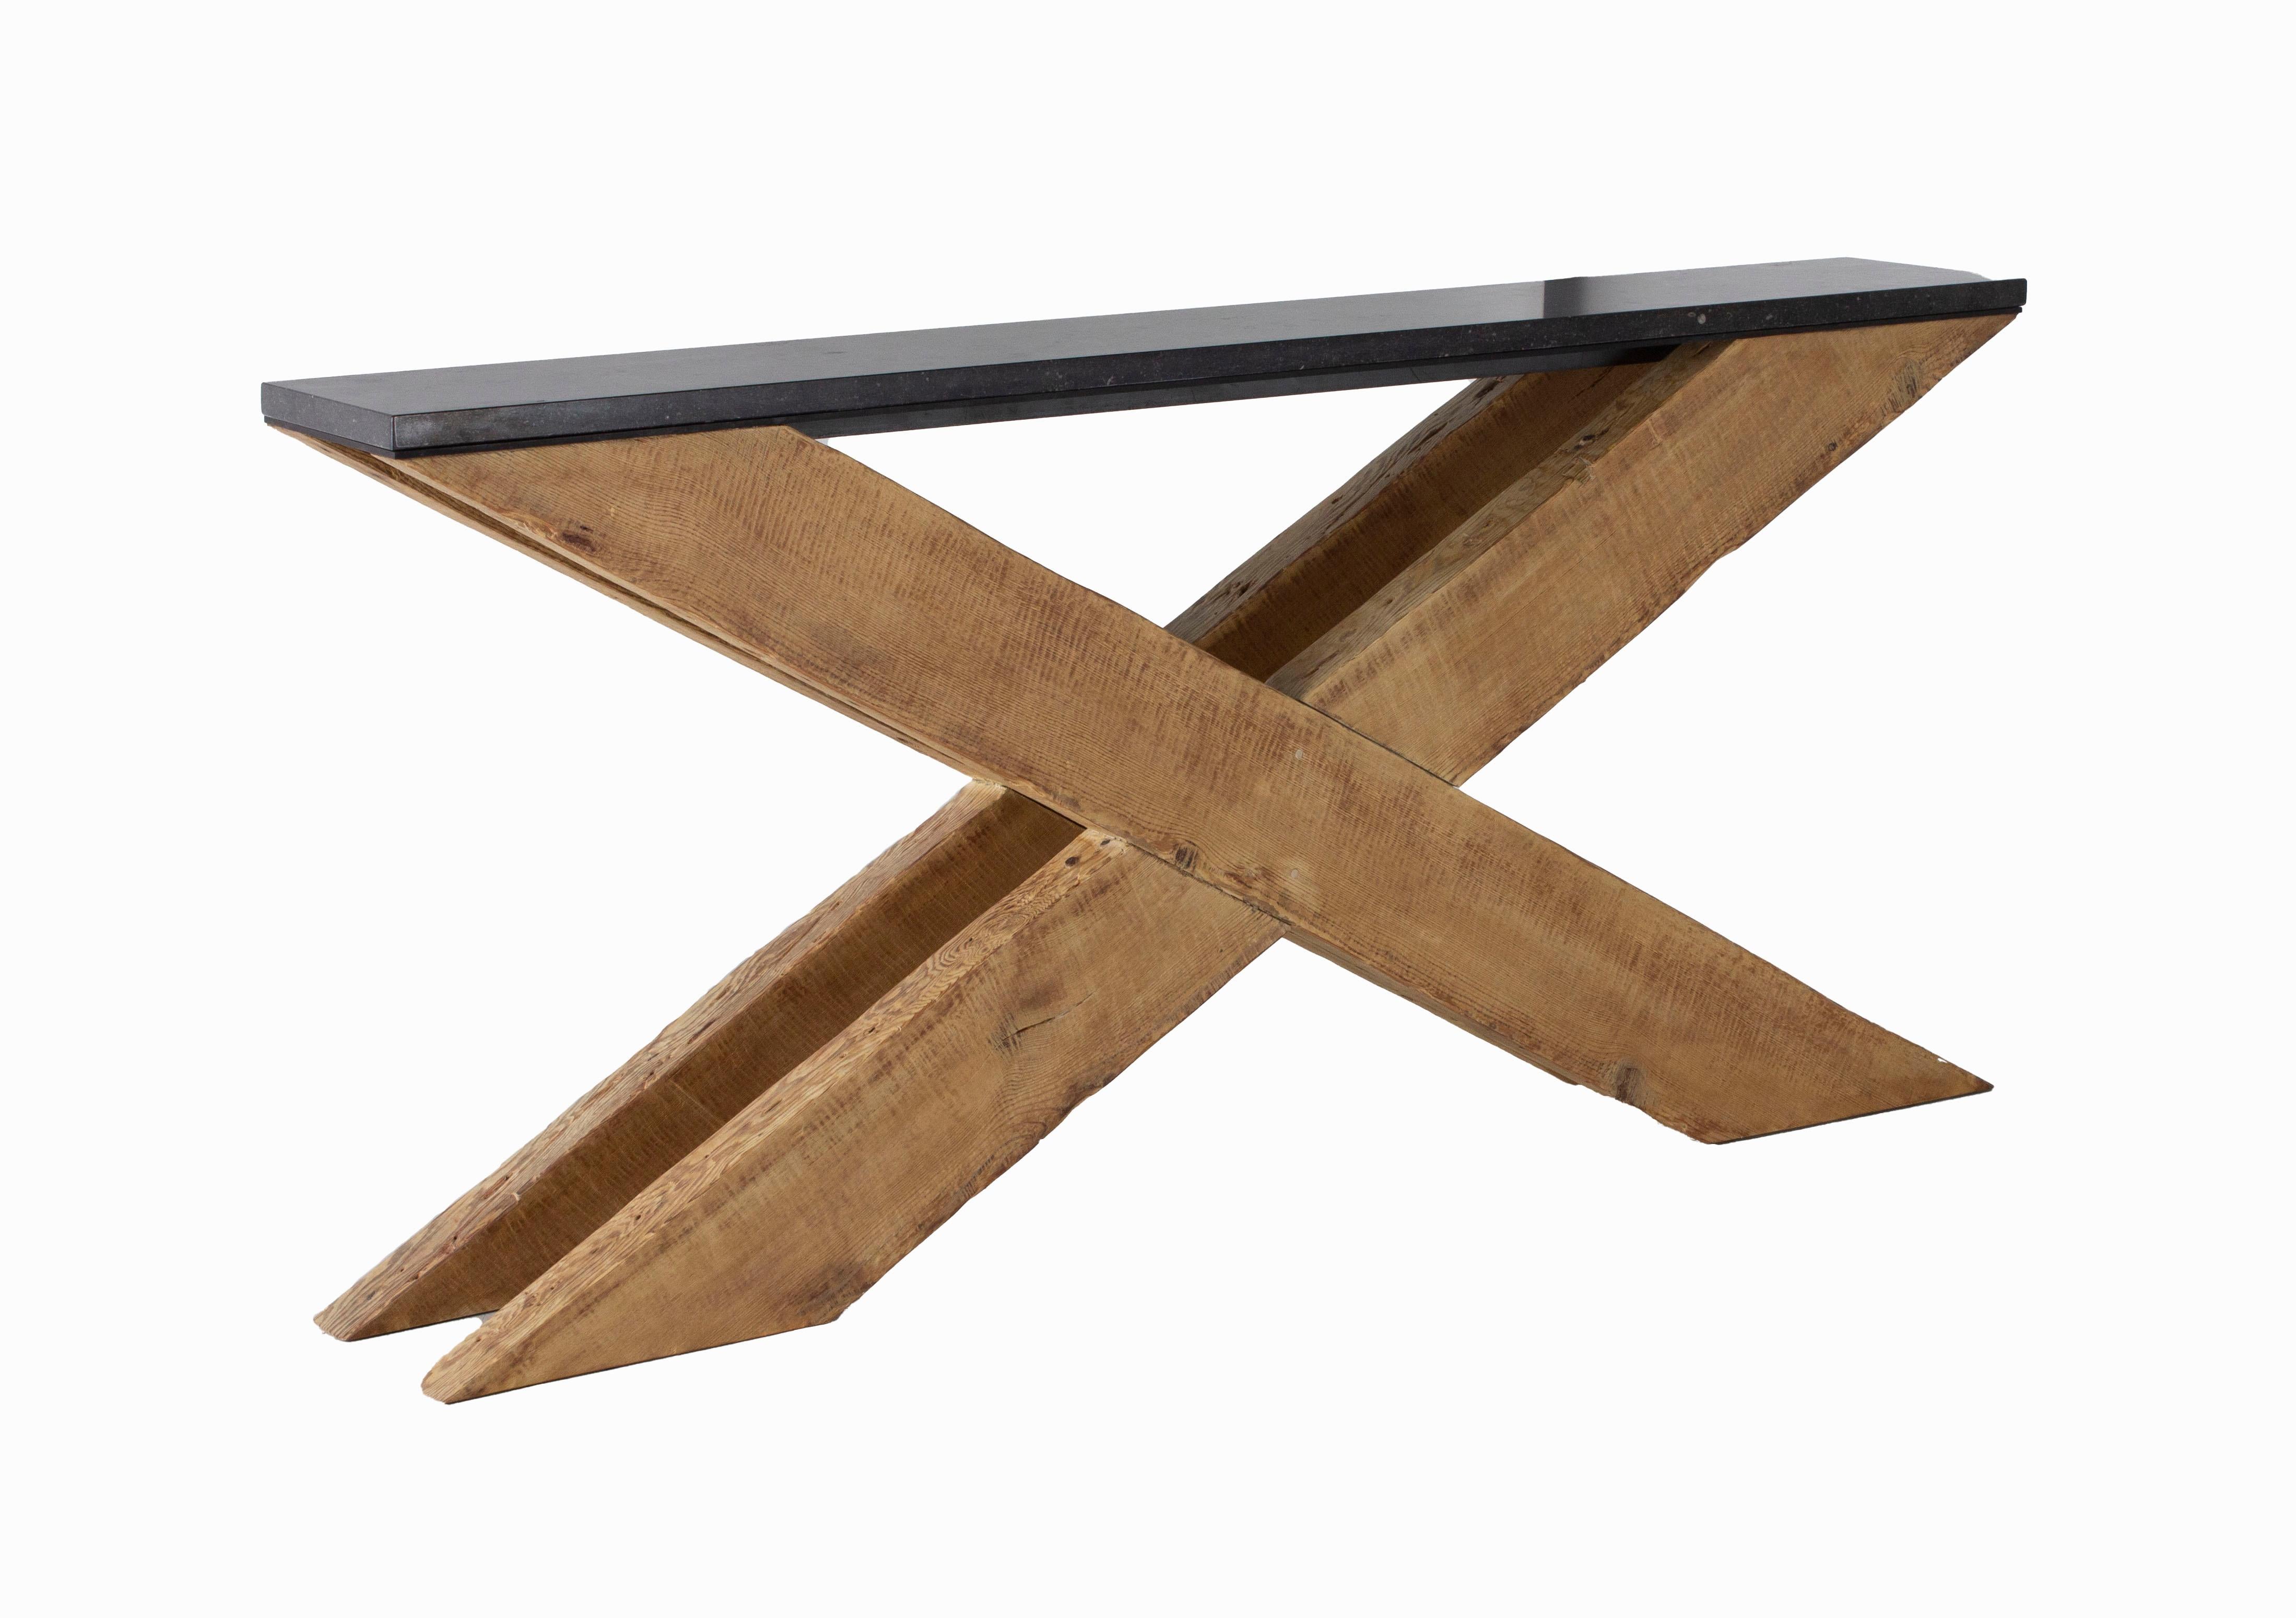 X-design serving table with reclaimed pine and Belgian blue stone top

Top: Belgian blue stone
Base: Reclaimed pine  

Stone top can be customized.

   